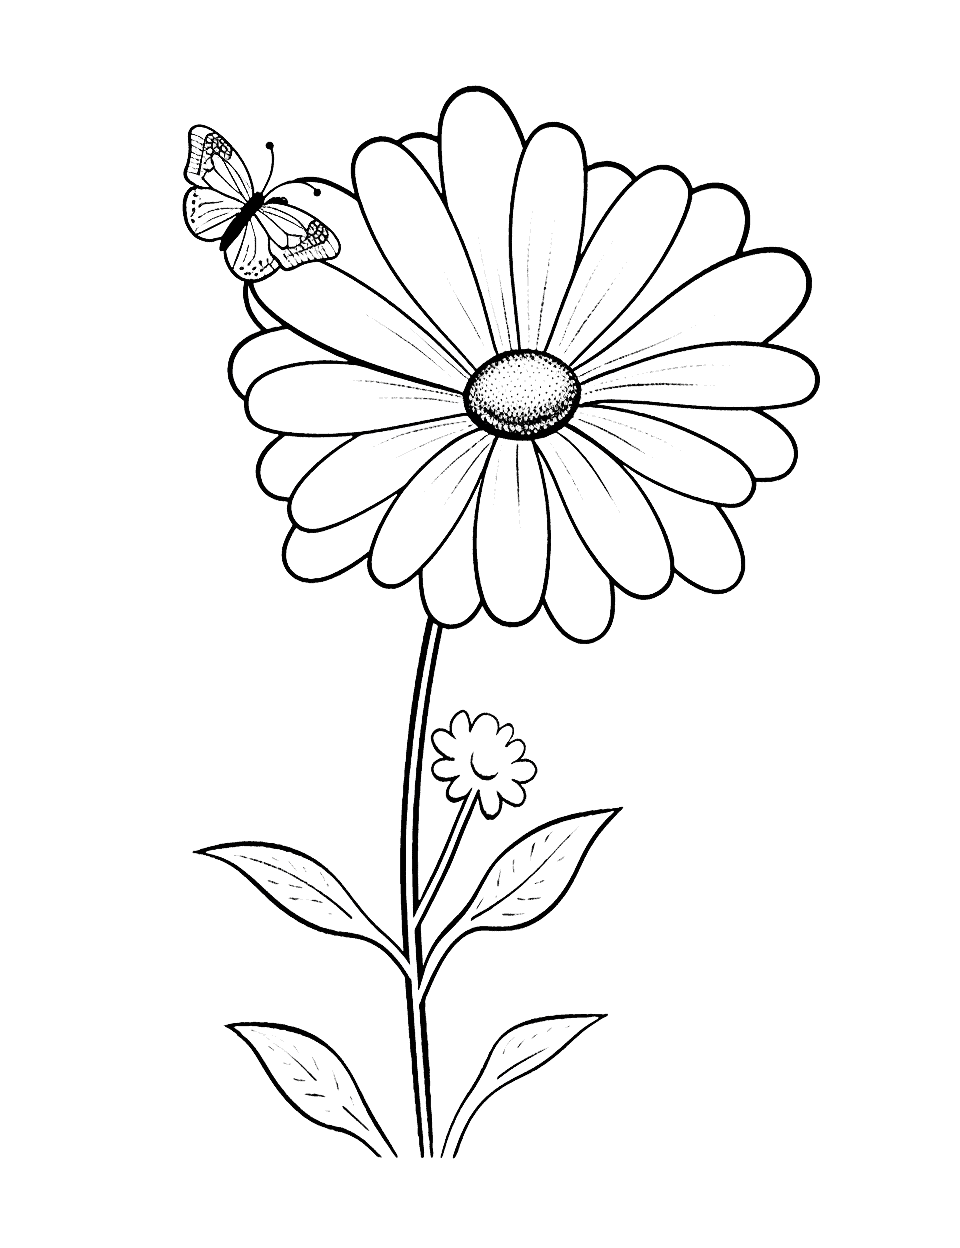 Cute Butterfly on Daisy Flower Coloring Page - A cute scene of a butterfly on a daisy flower.